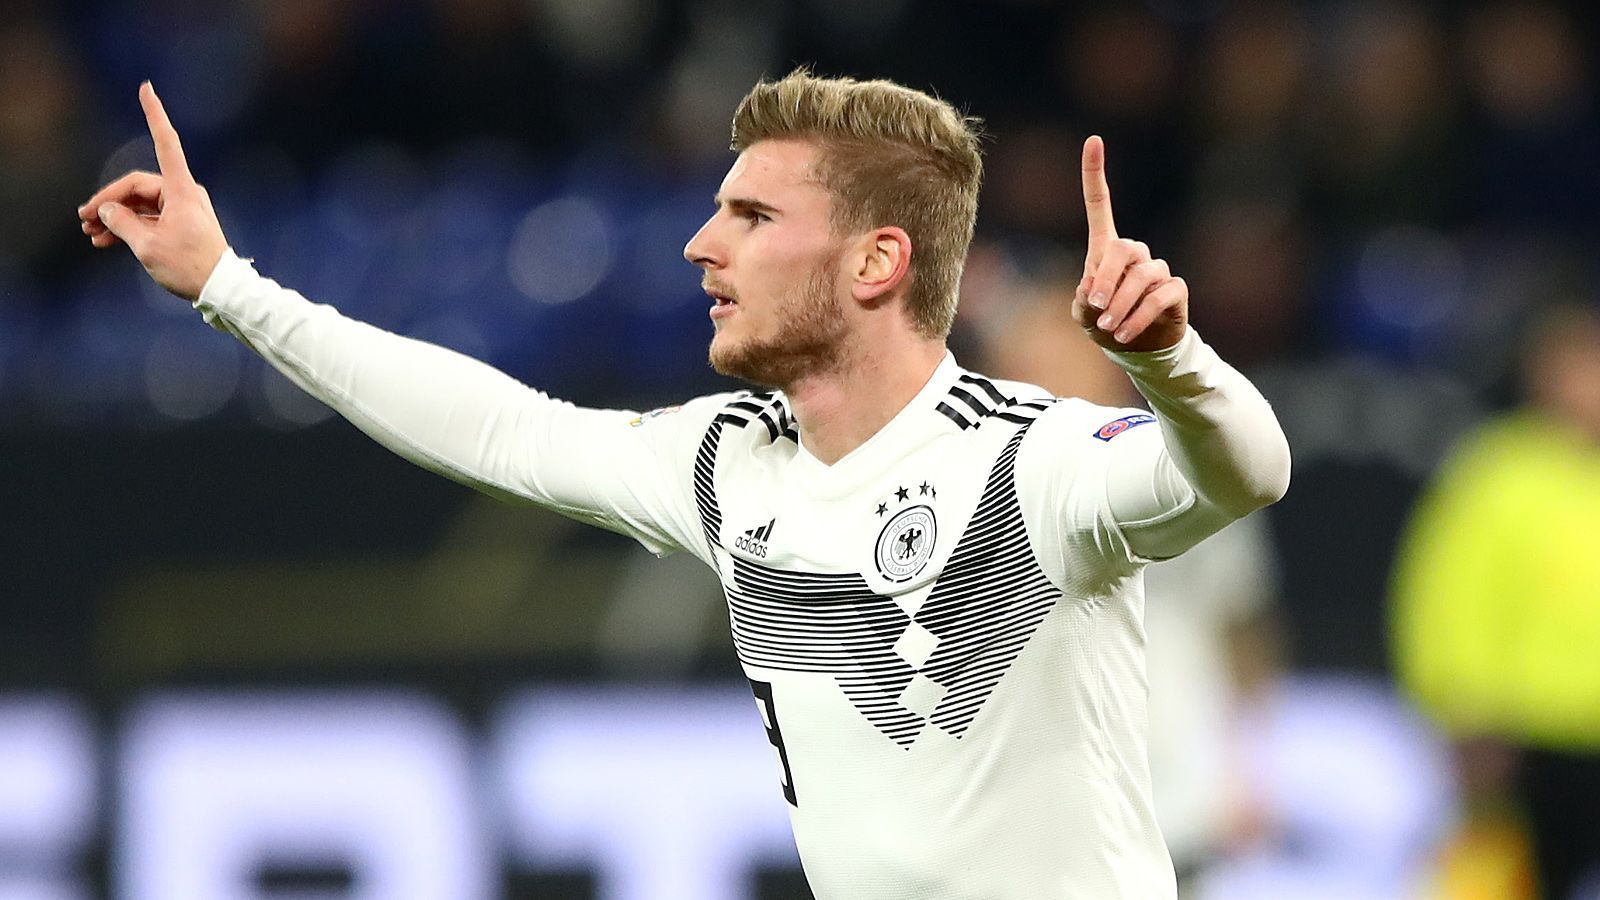 
                <strong>Timo Werner</strong><br>
                &#x2022; Position: Mittelfeld/Angriff -<br>&#x2022; Alter: 25 Jahre -<br>&#x2022; Verein: FC Chelsea<br>
              